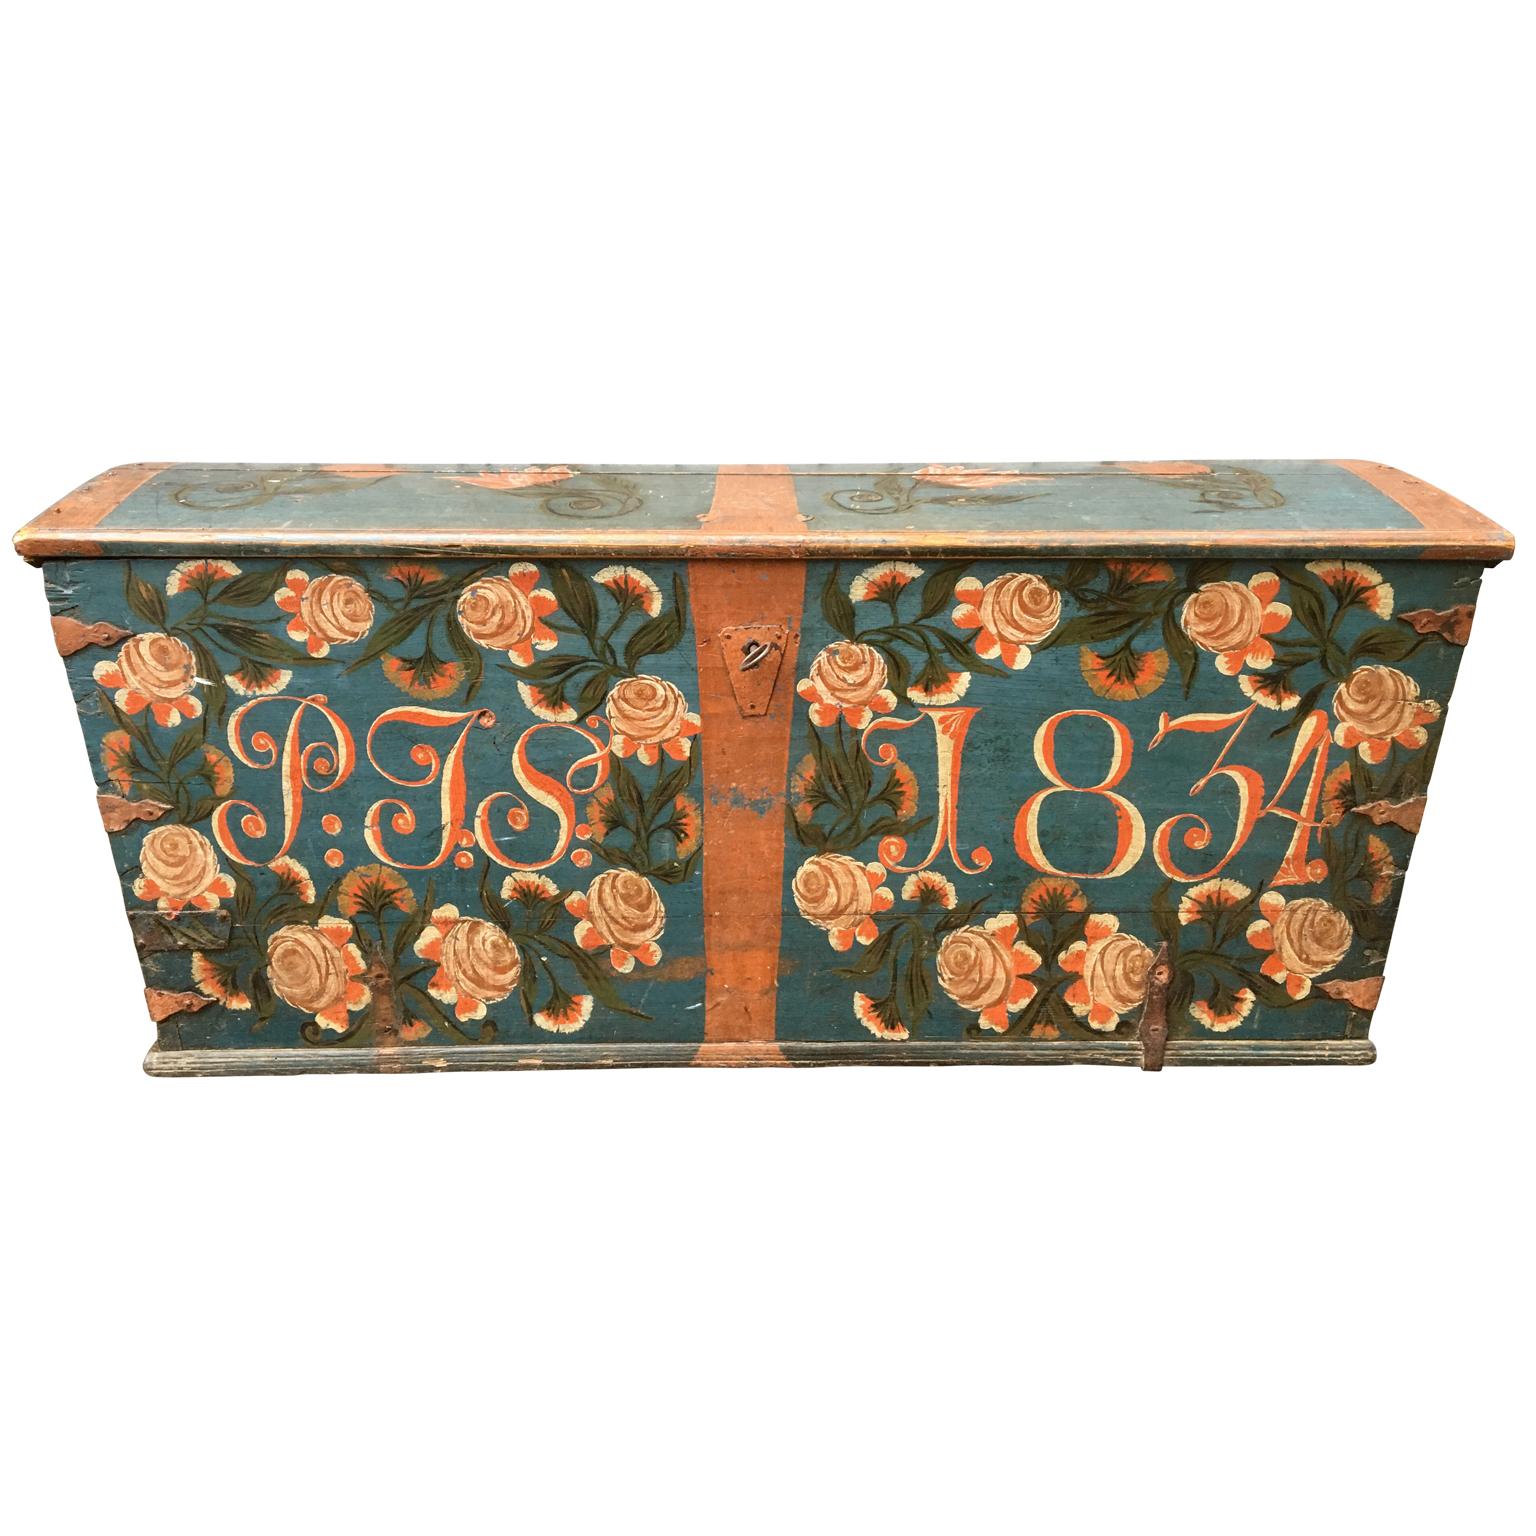 Country Swedish Original Painted Dome-Top Wedding Trunk, Dated 1834